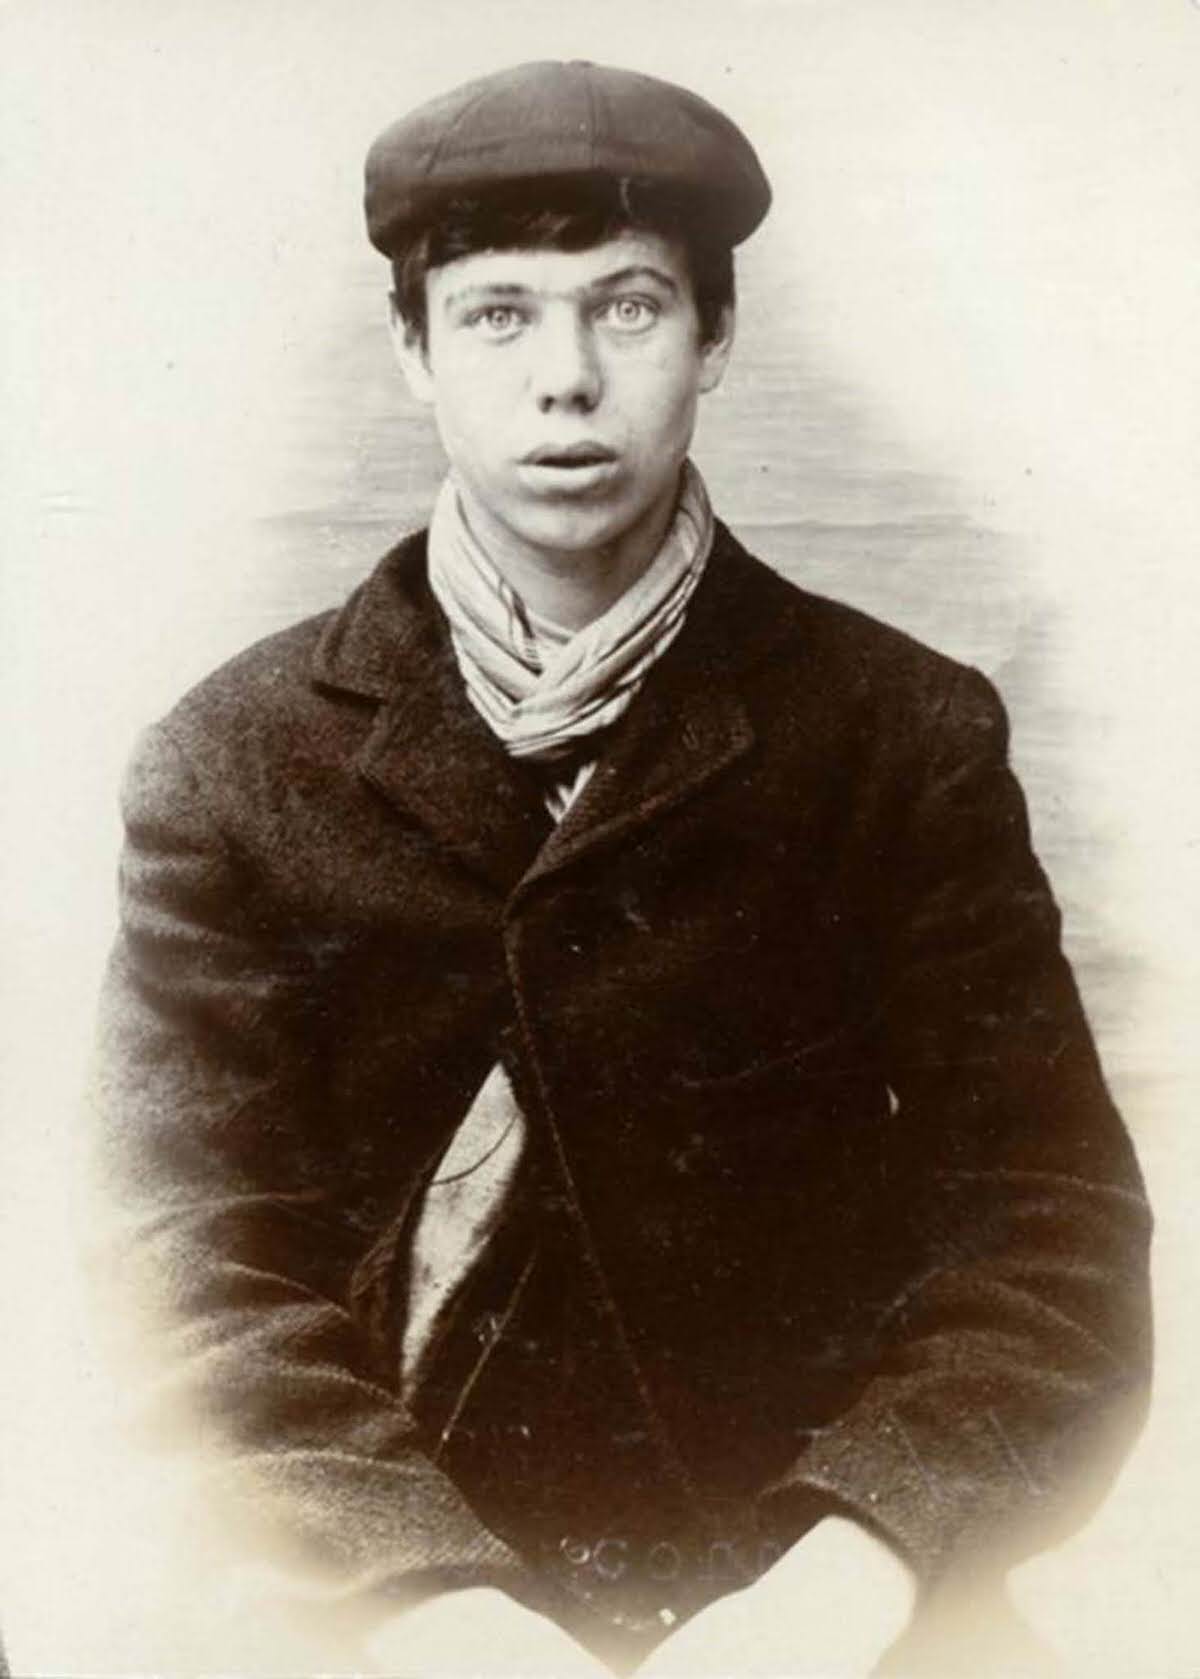 John Scott, age unspecified, arrested for stealing from a shop door, 1906.